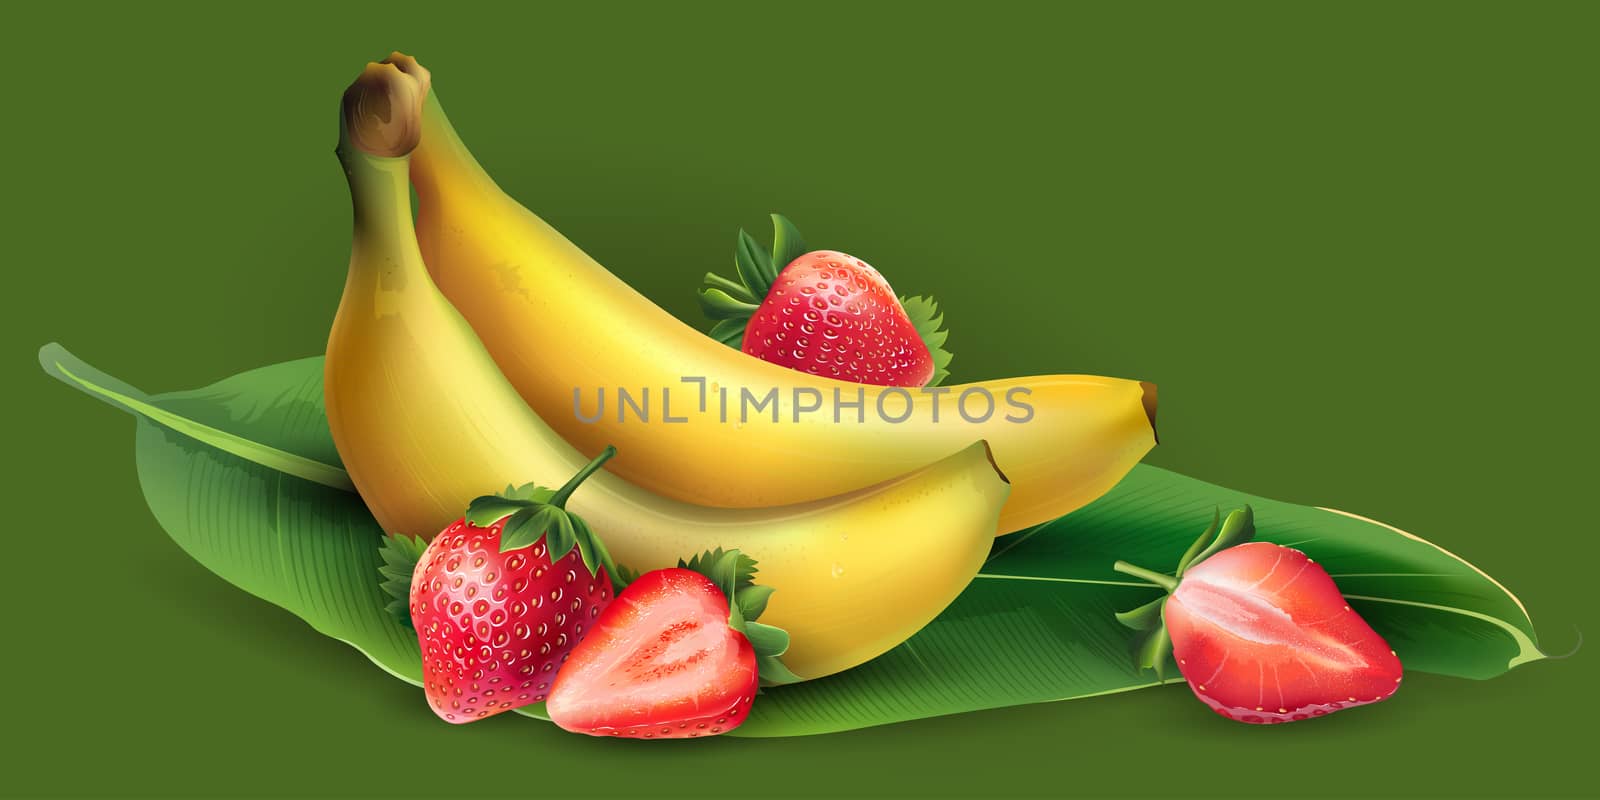 Delicious banana and strawberry on a green background.